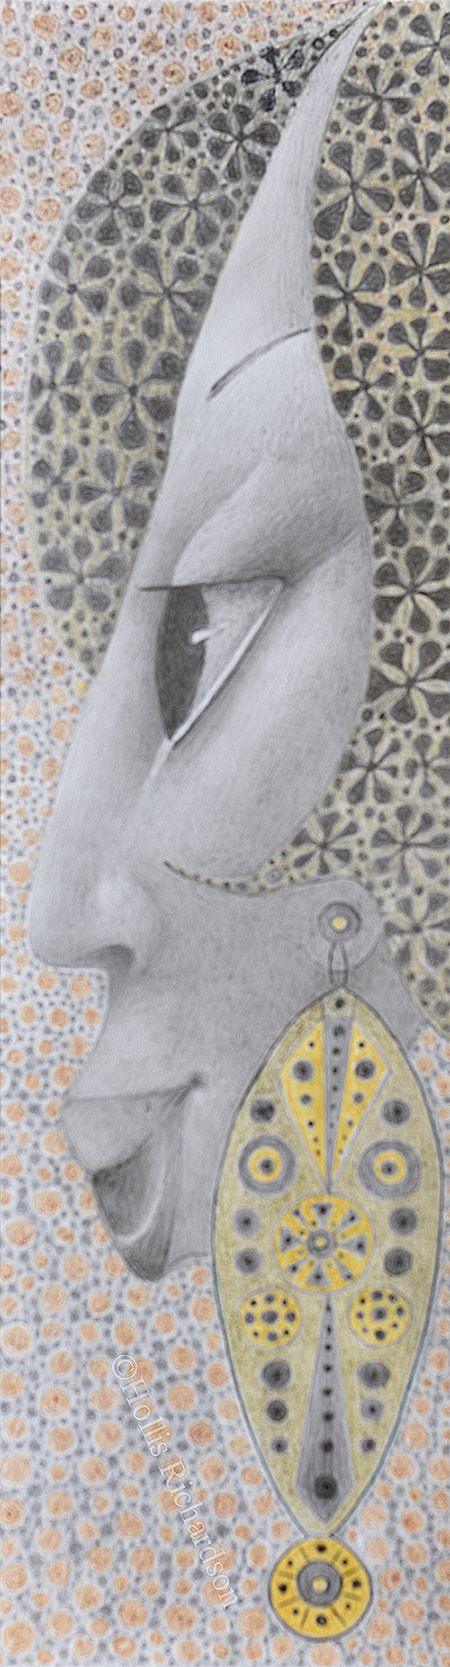 Long profile of a woman's face in subtle shades of gray and pastel orang, long  yellow earrings and beautriful eyes by artist Hollis Richardson.